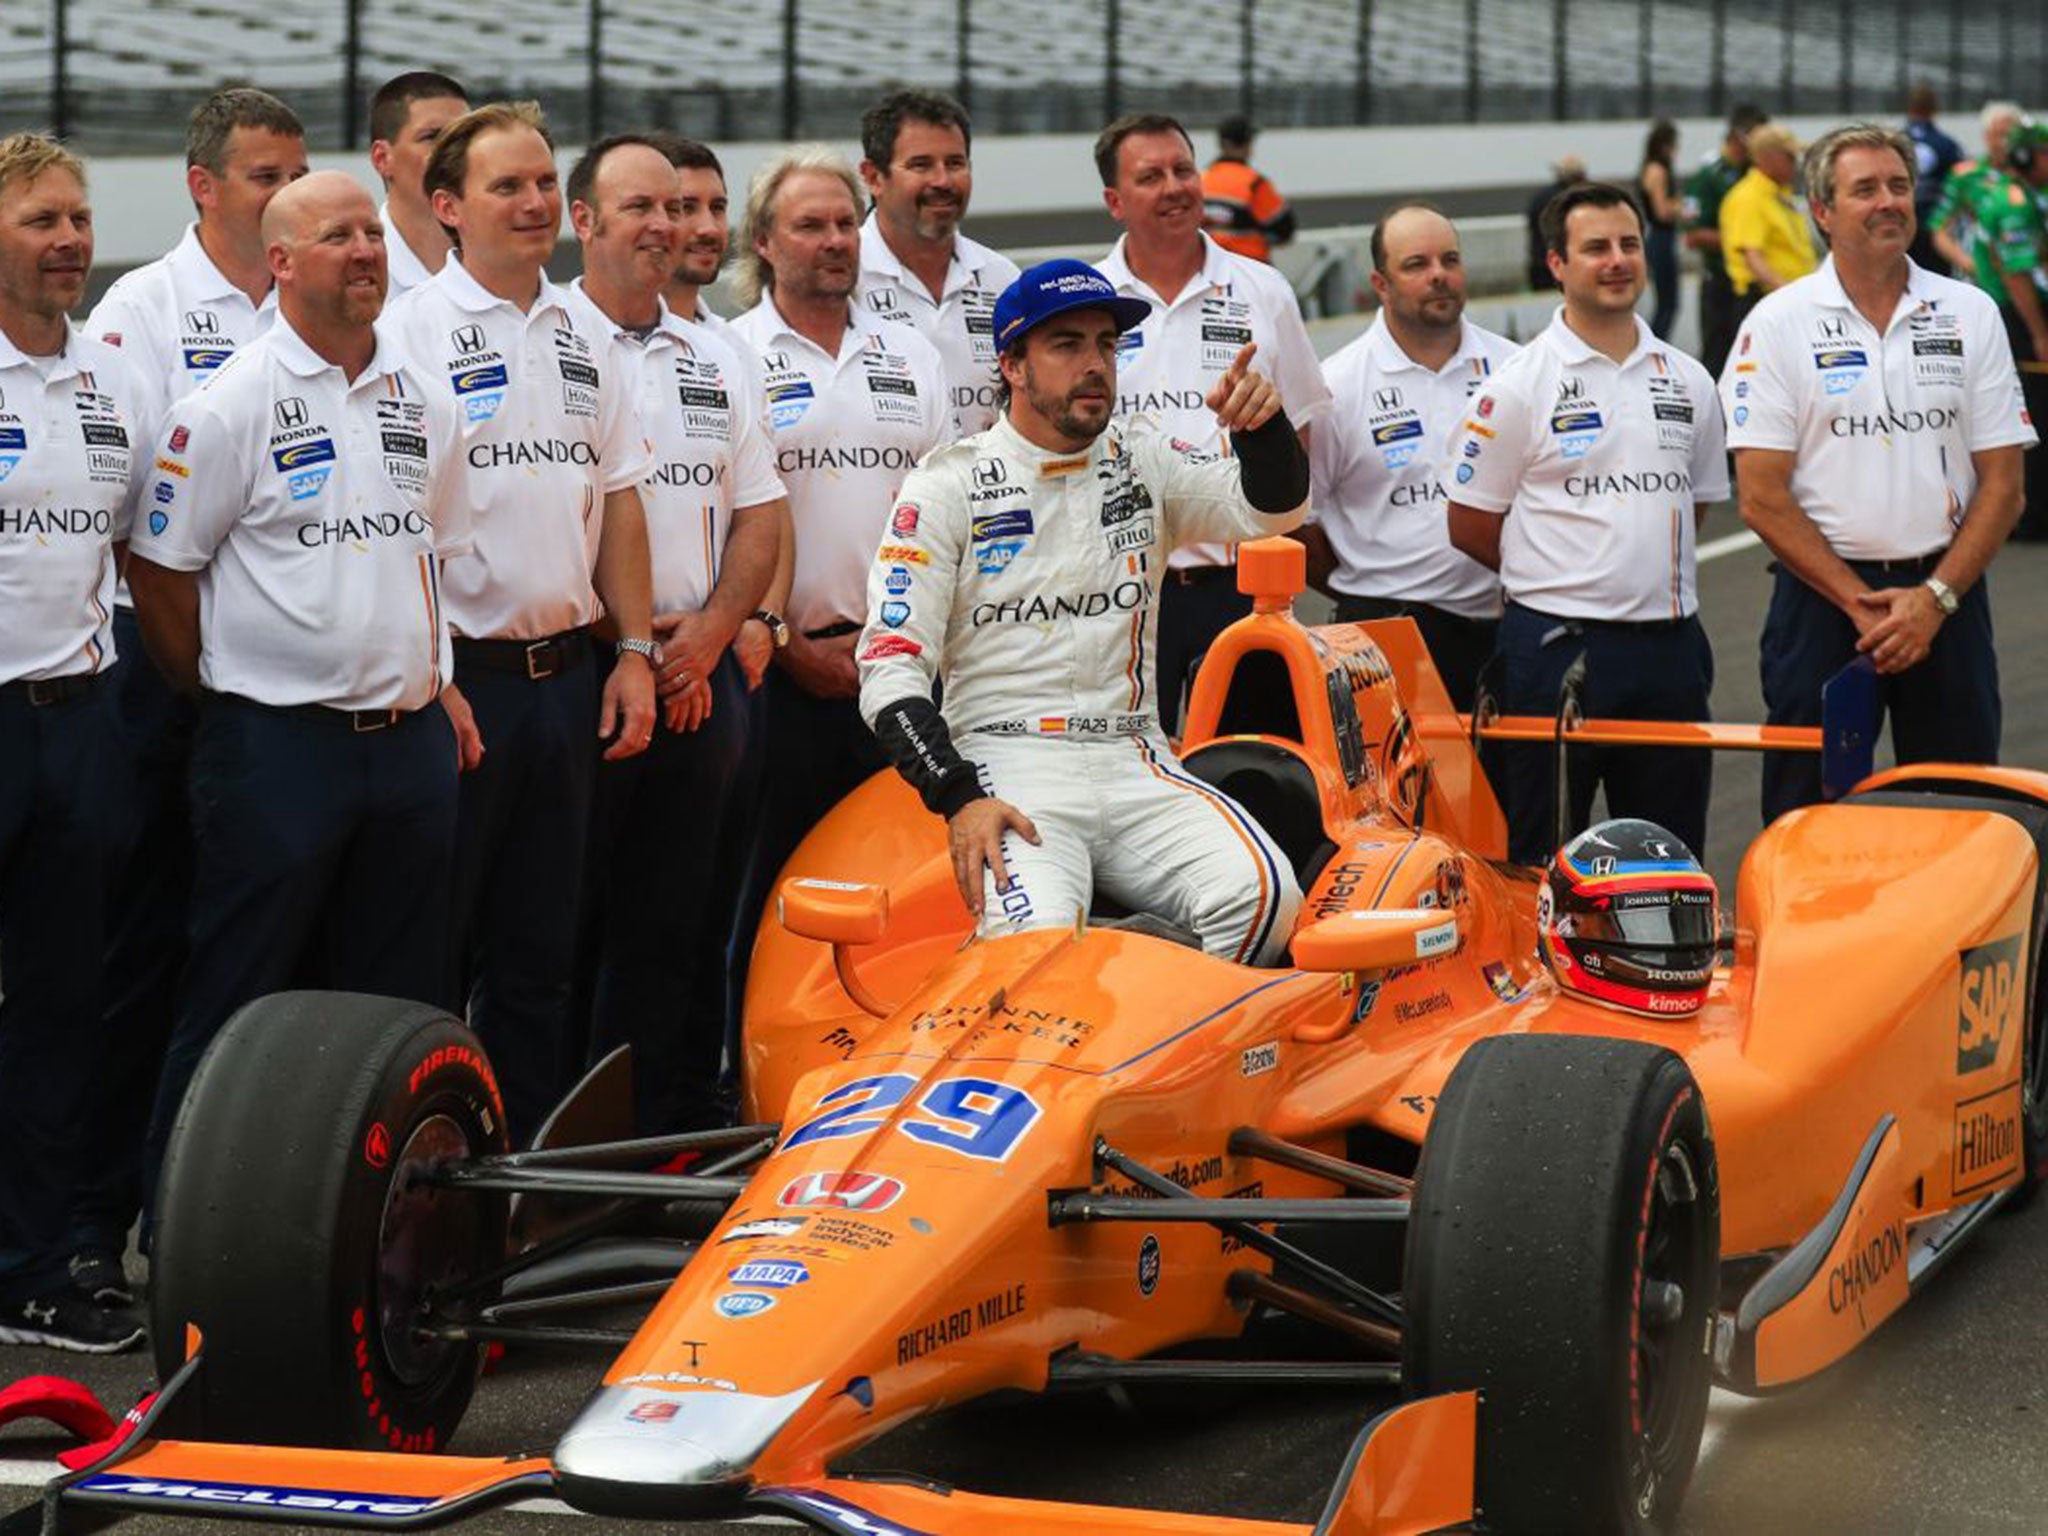 Alonso is missing the Monaco Grand Prix for the Indy 500